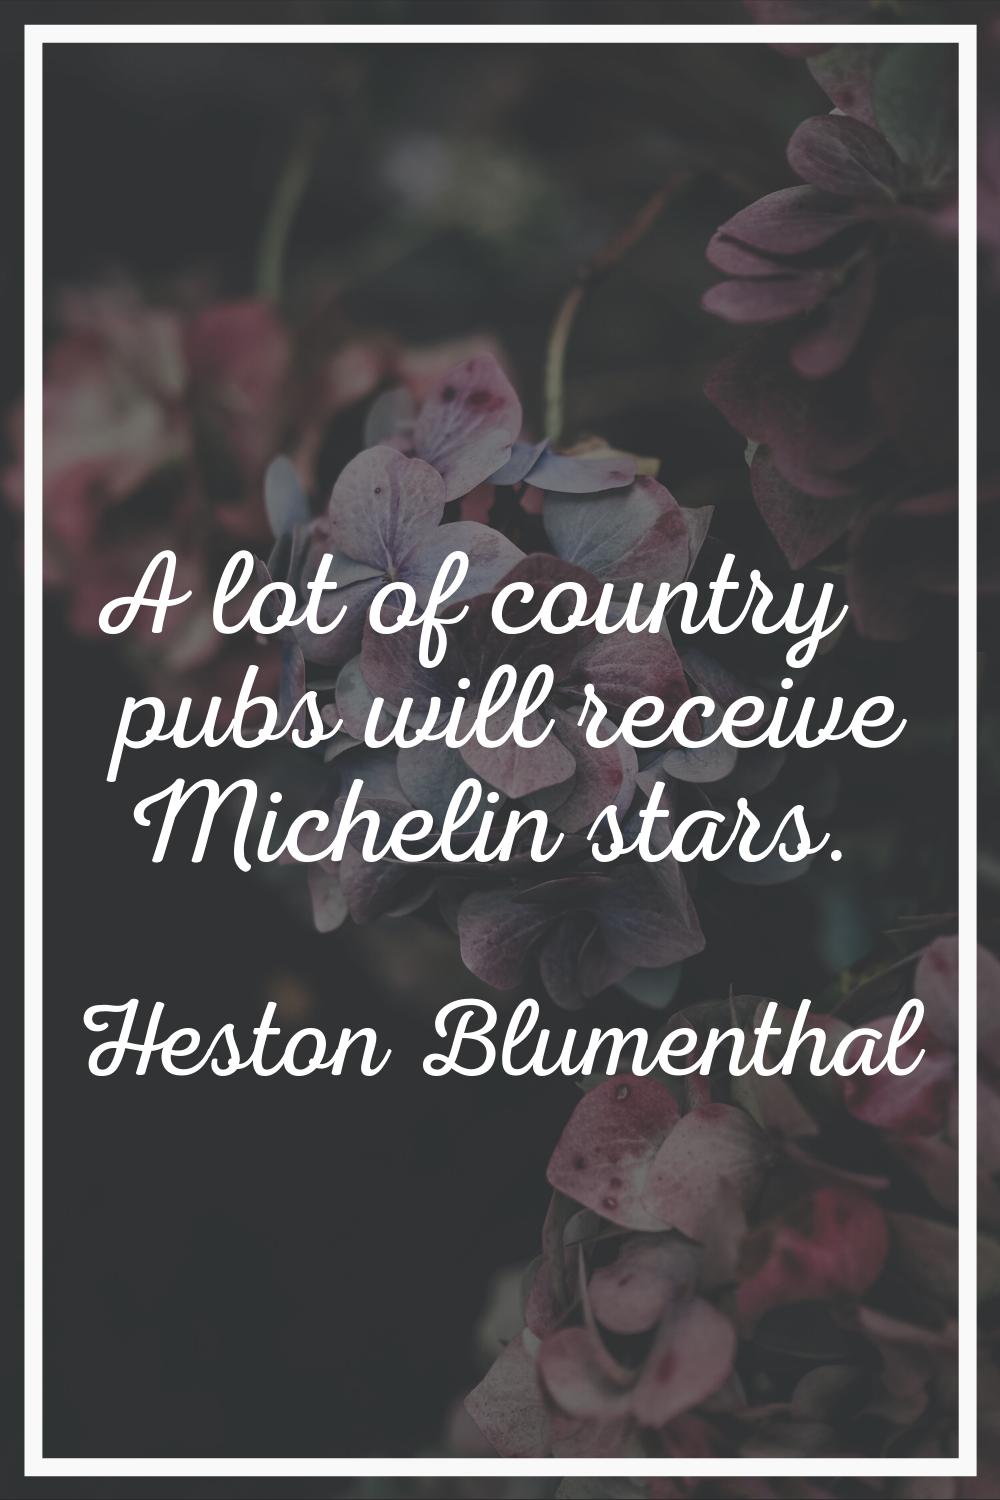 A lot of country pubs will receive Michelin stars.